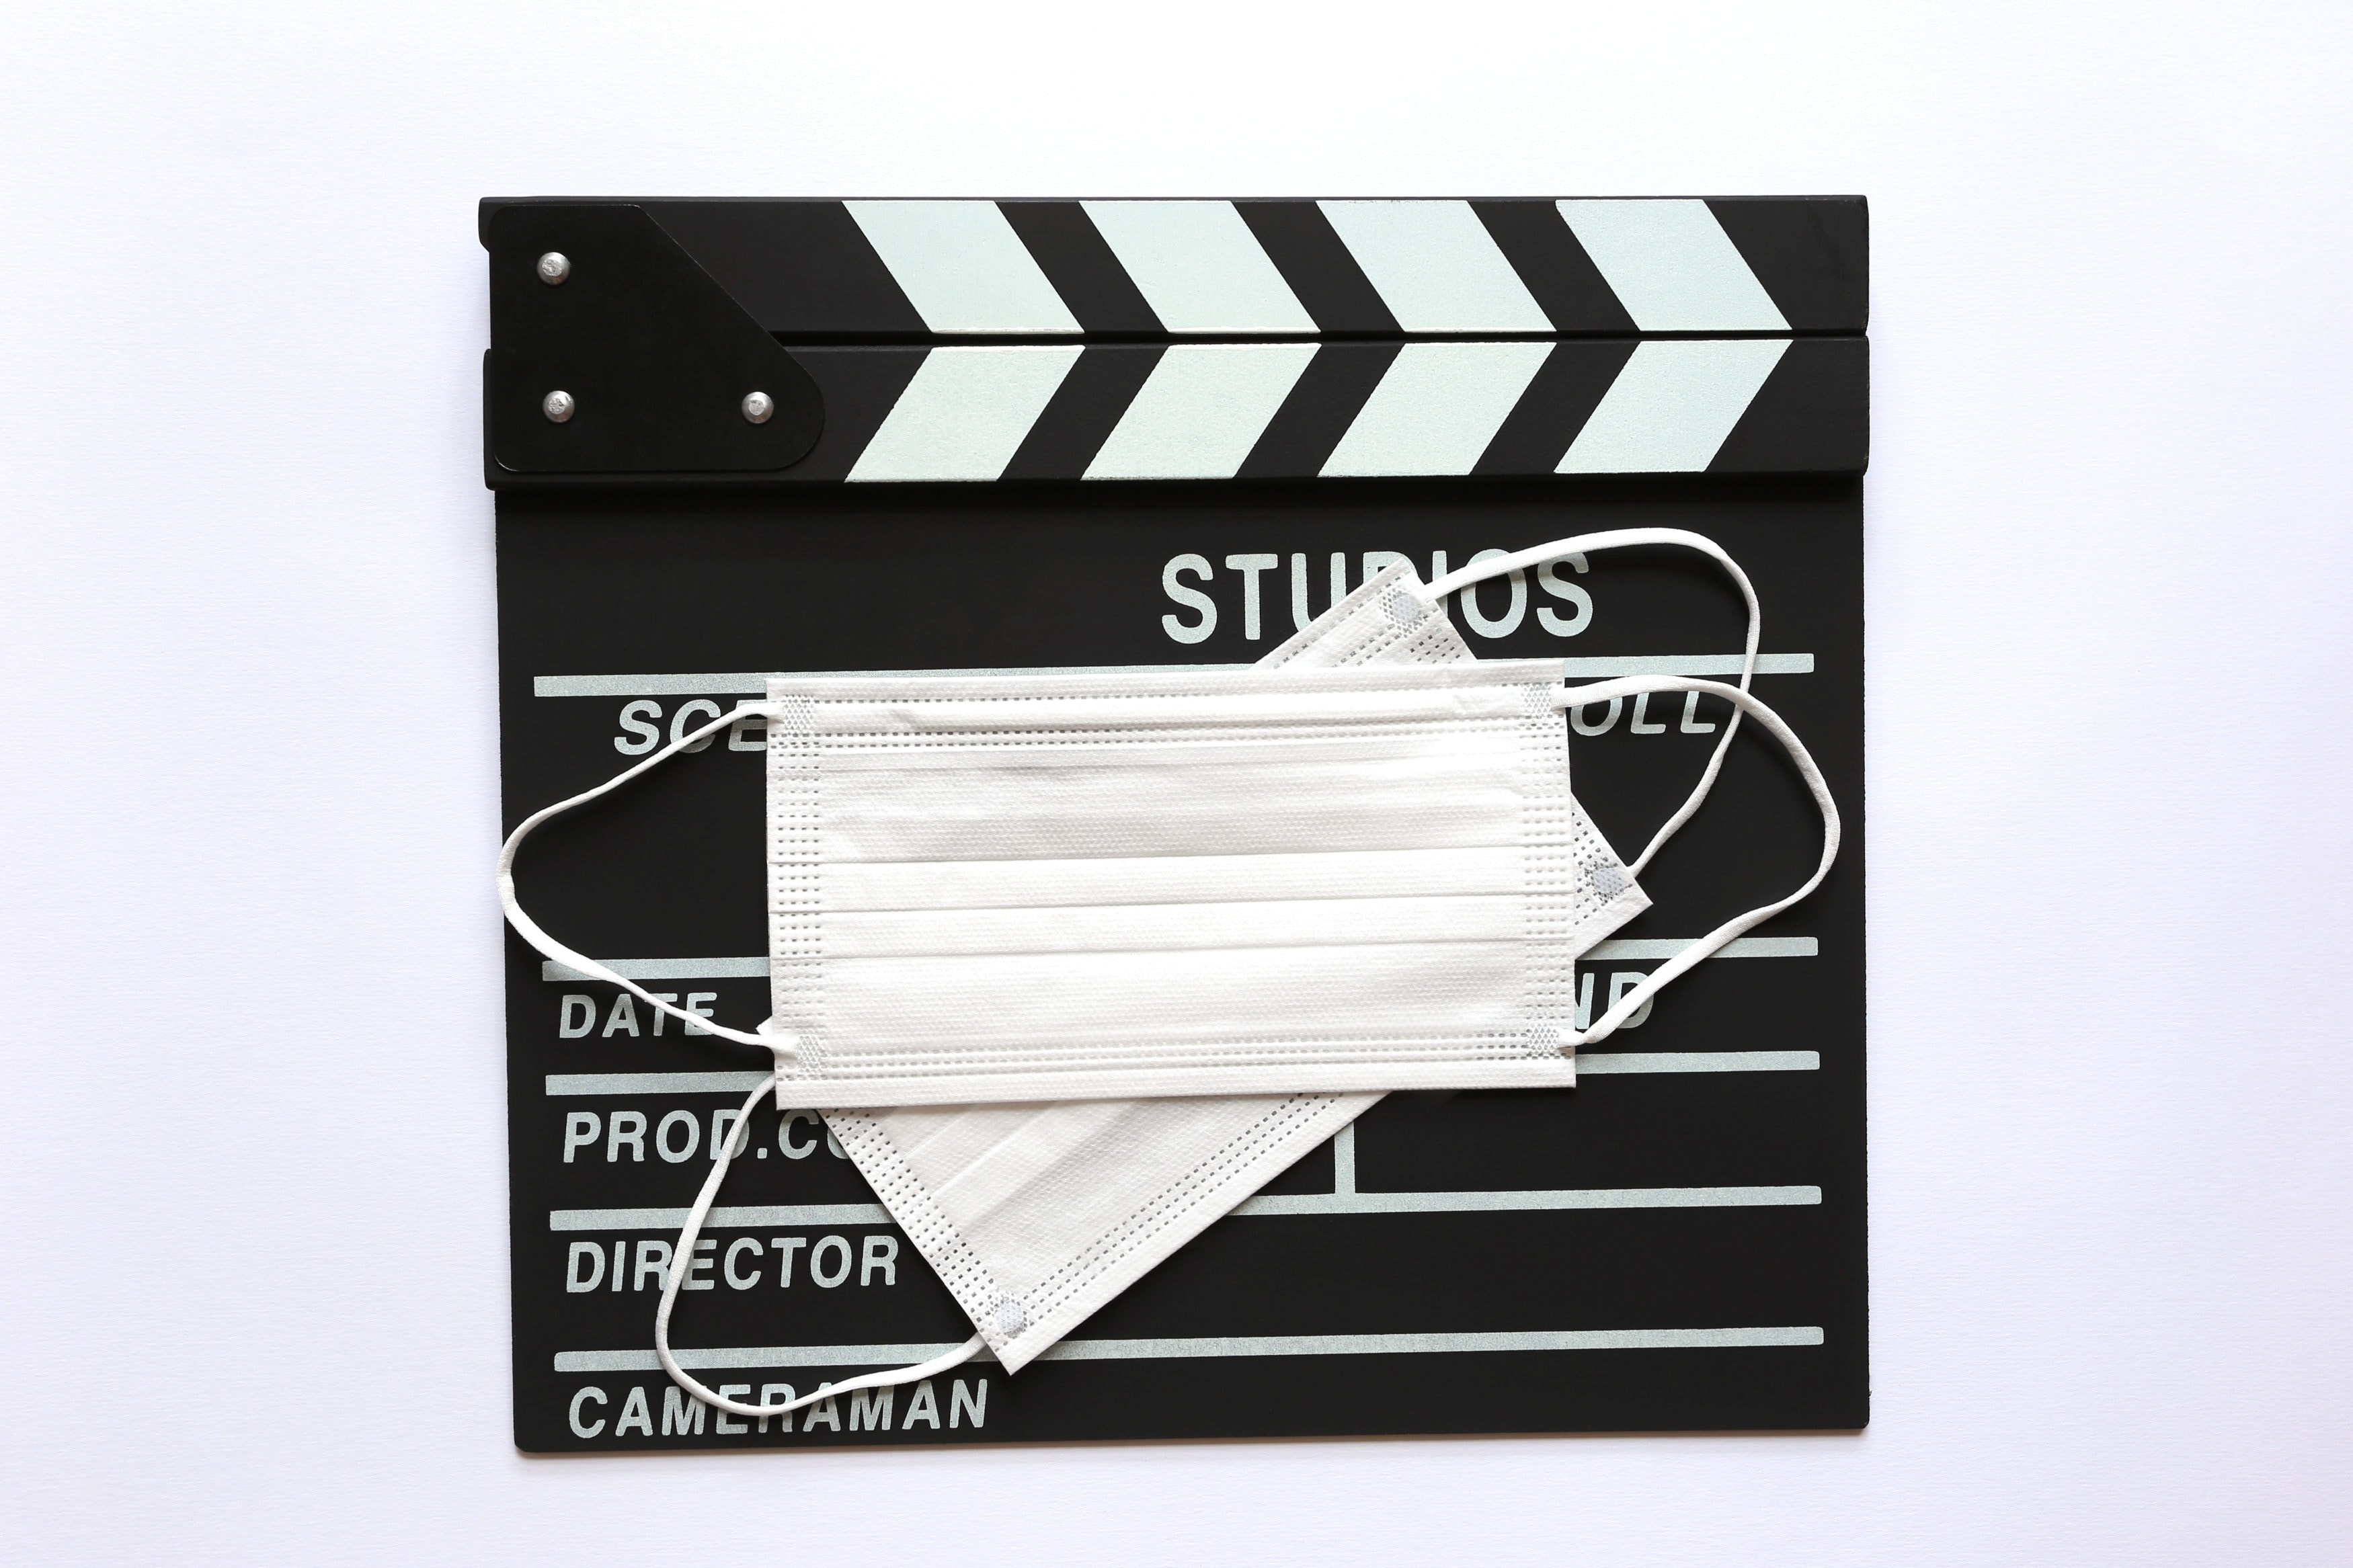 Amedical face mask on Clapperboard or Film slate on white background